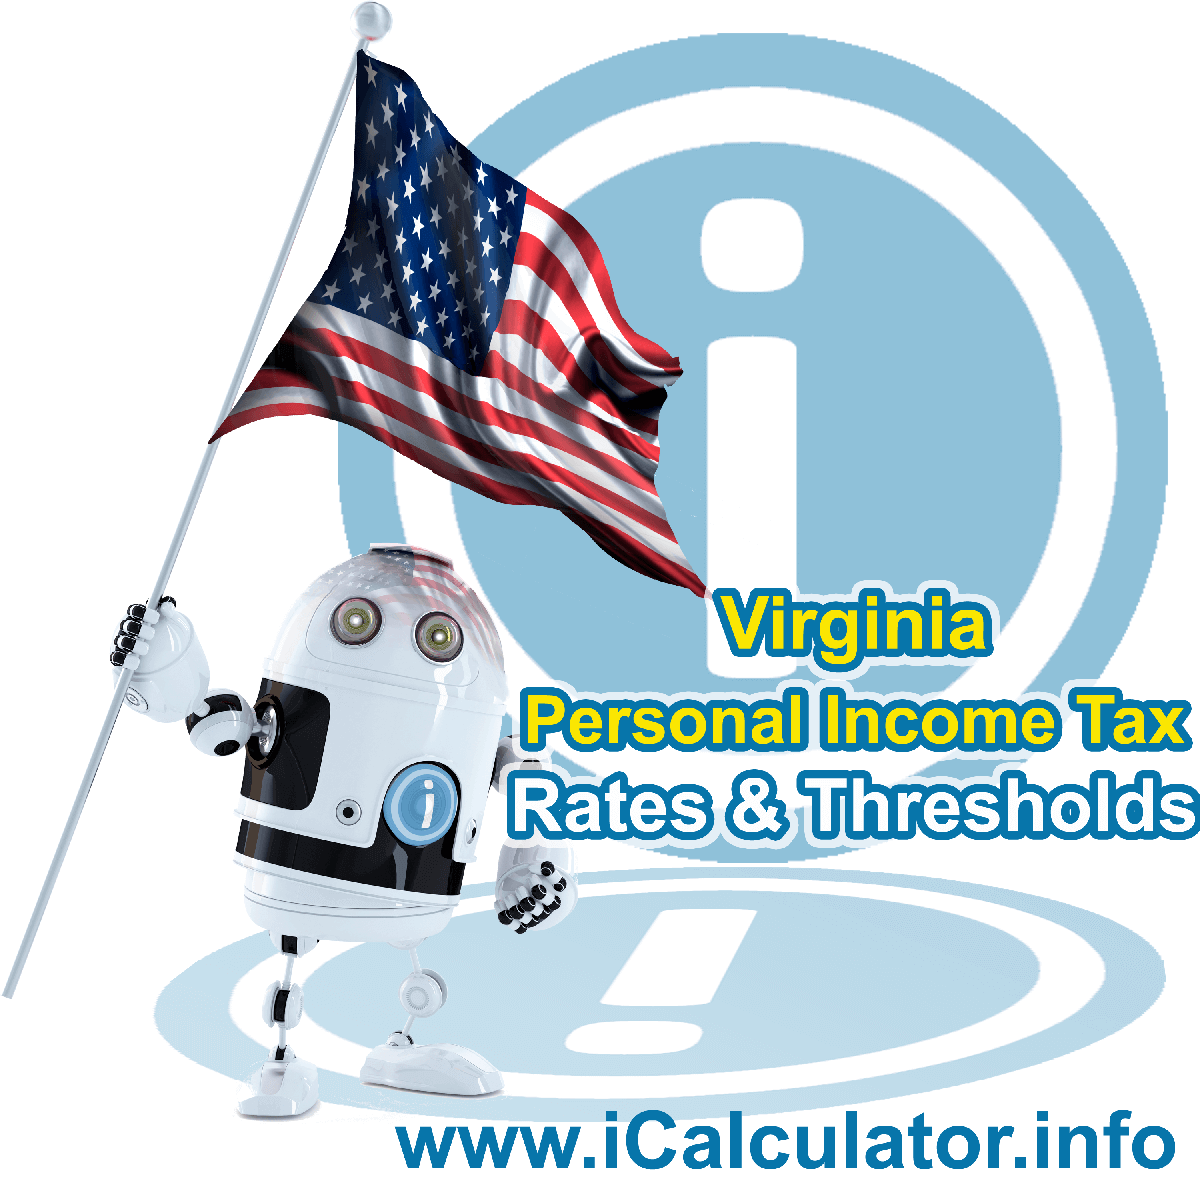 Virginia State Tax Tables 2015. This image displays details of the Virginia State Tax Tables for the 2015 tax return year which is provided in support of the 2015 US Tax Calculator